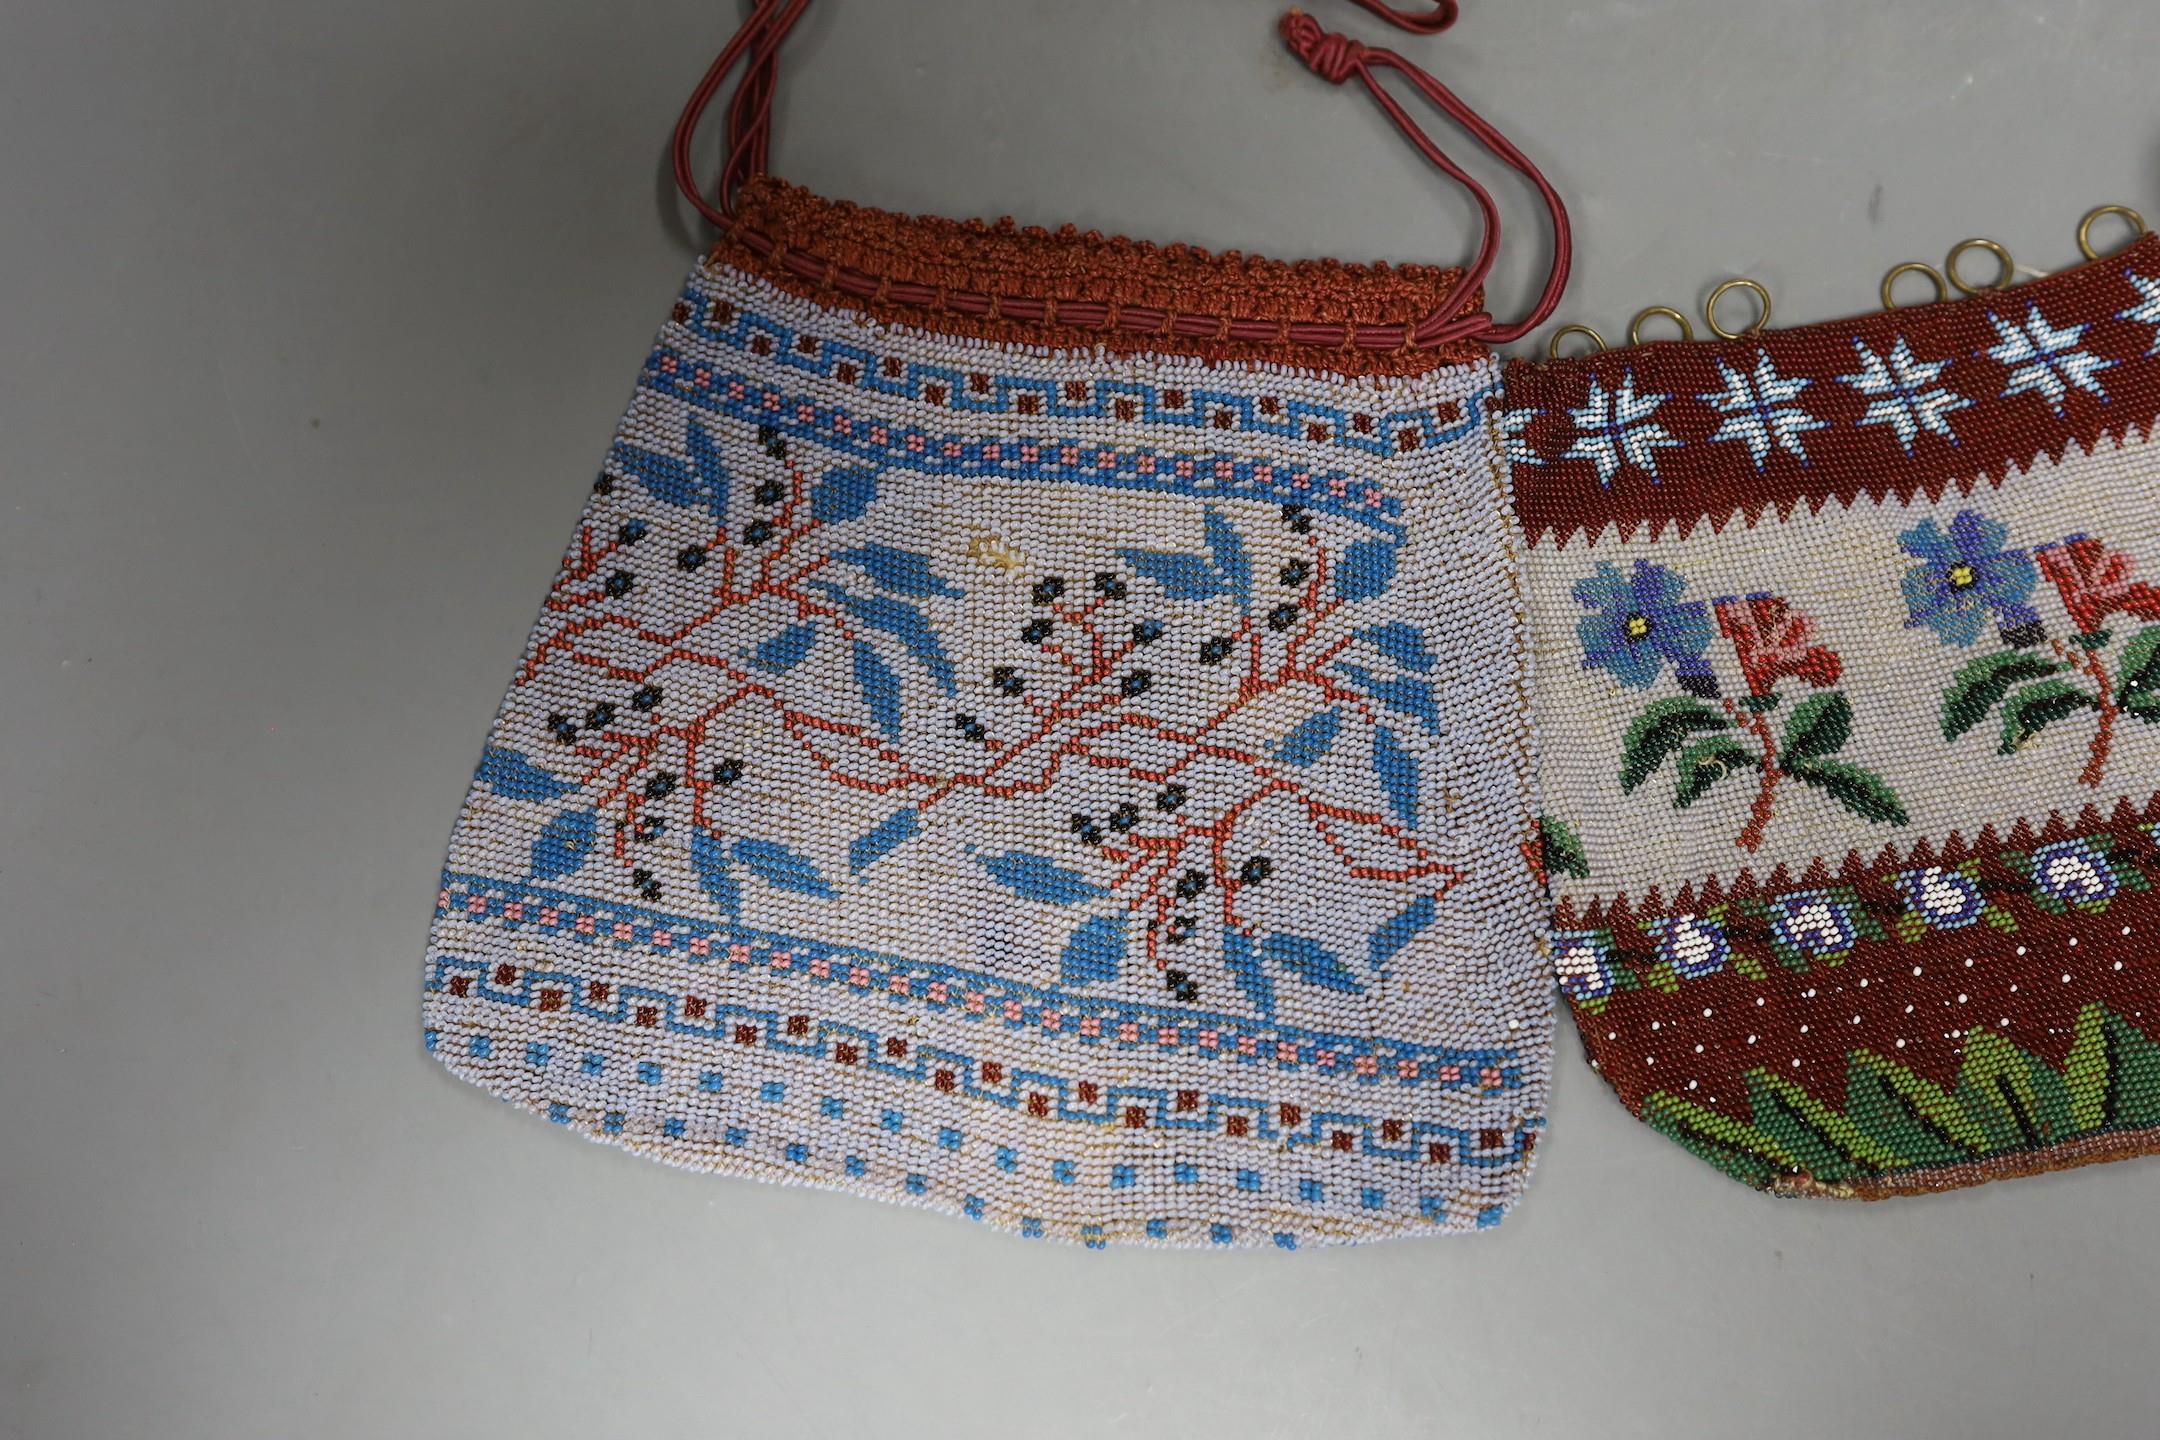 A 19th century bead worked bag with sailing ship design, a similar floral bead worked bag and a - Image 2 of 4